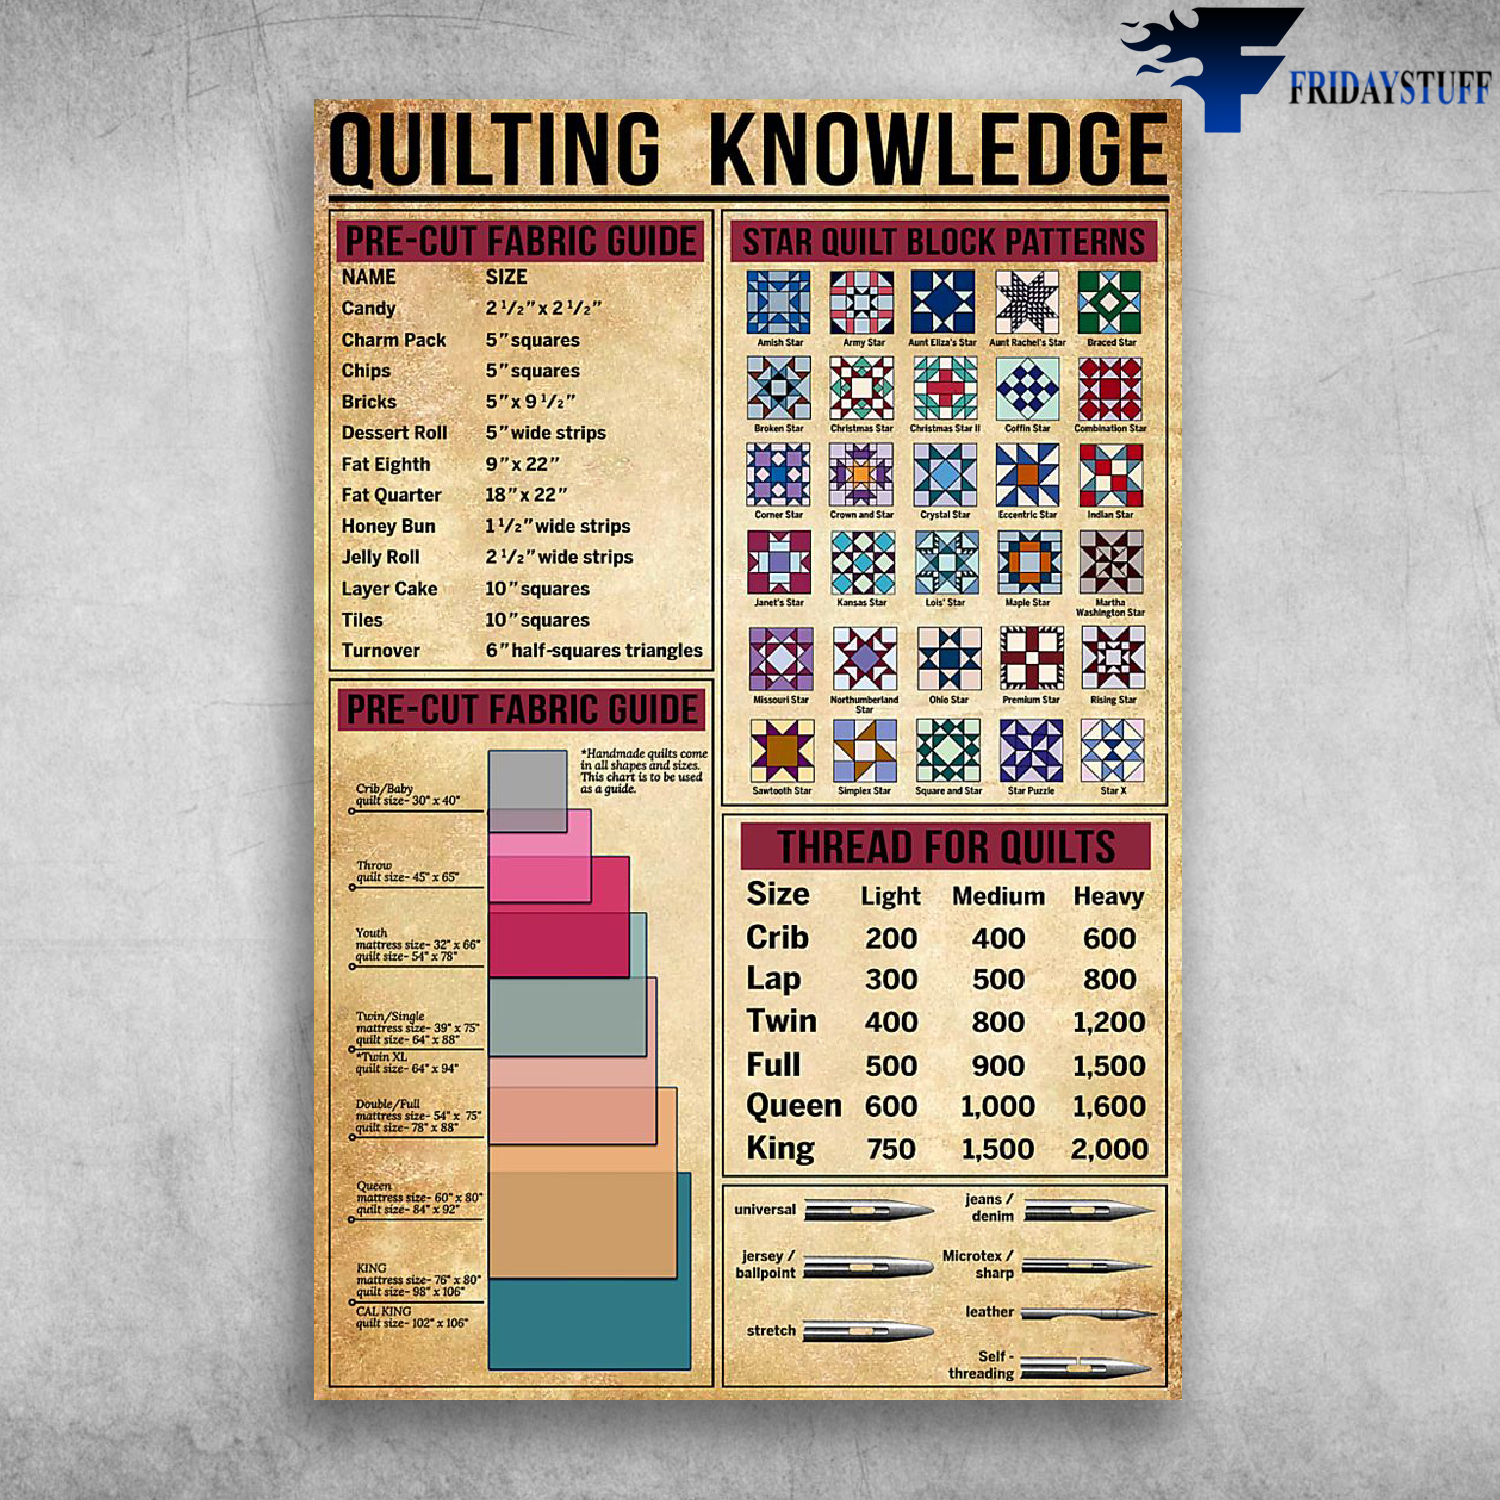 Quilting Knowledge Pre-Cut Fabric Guide